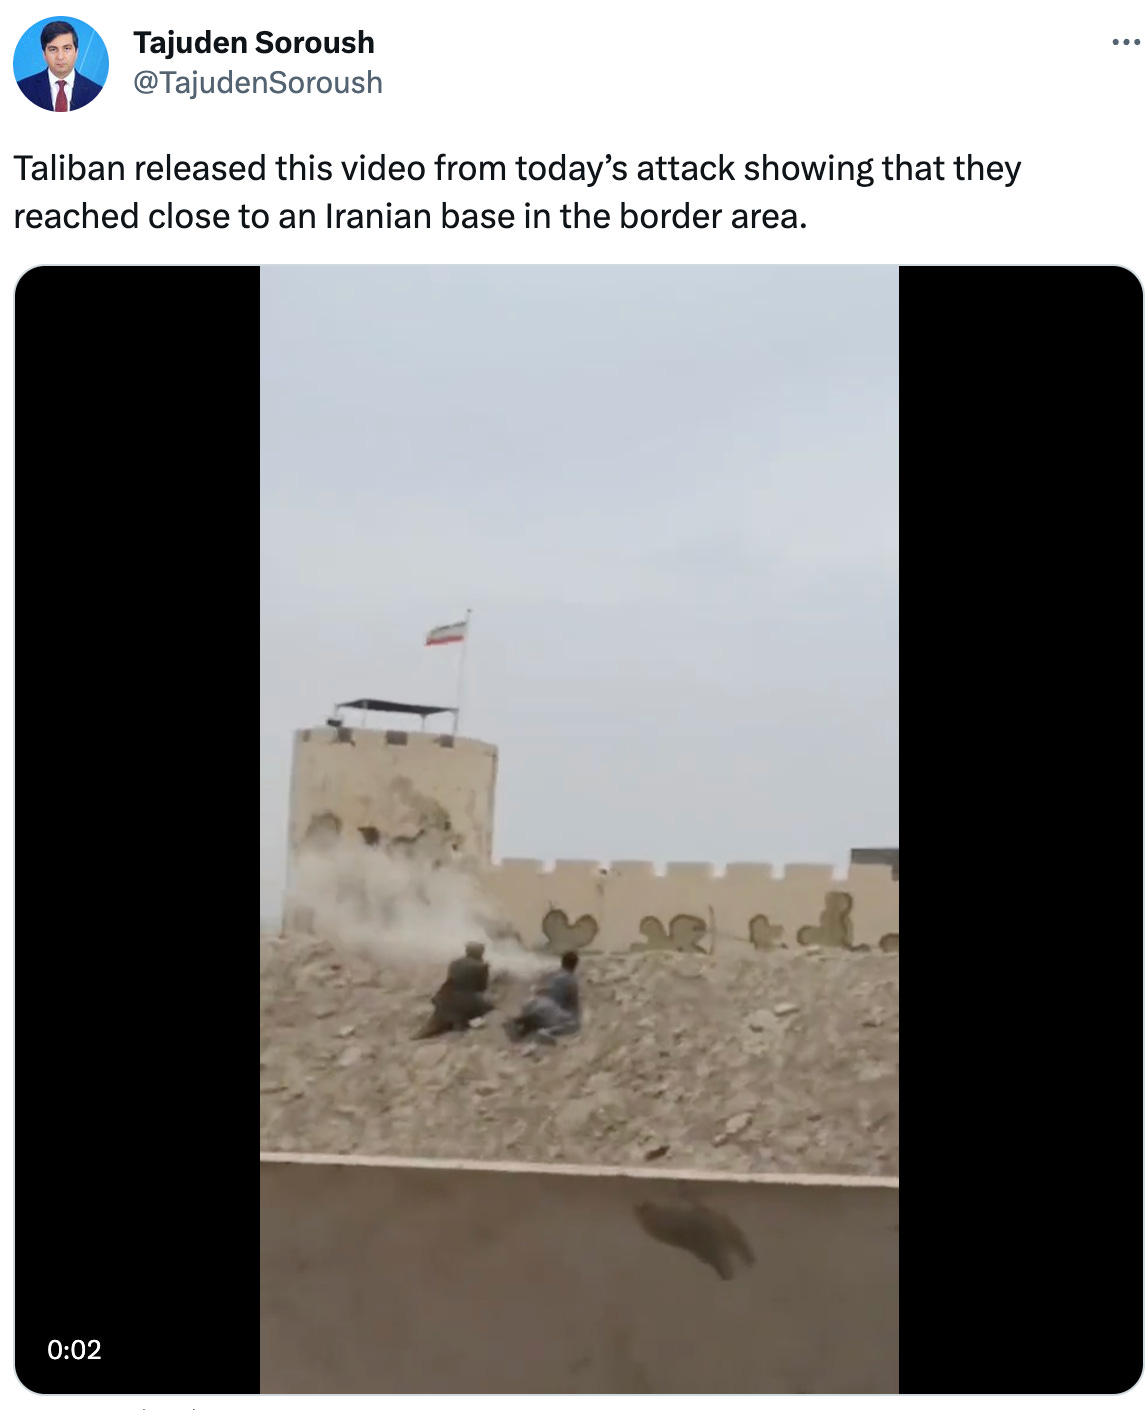  Tajuden Soroush @TajudenSoroush Taliban released this video from today’s attack showing that they reached close to an Iranian base in the border area.